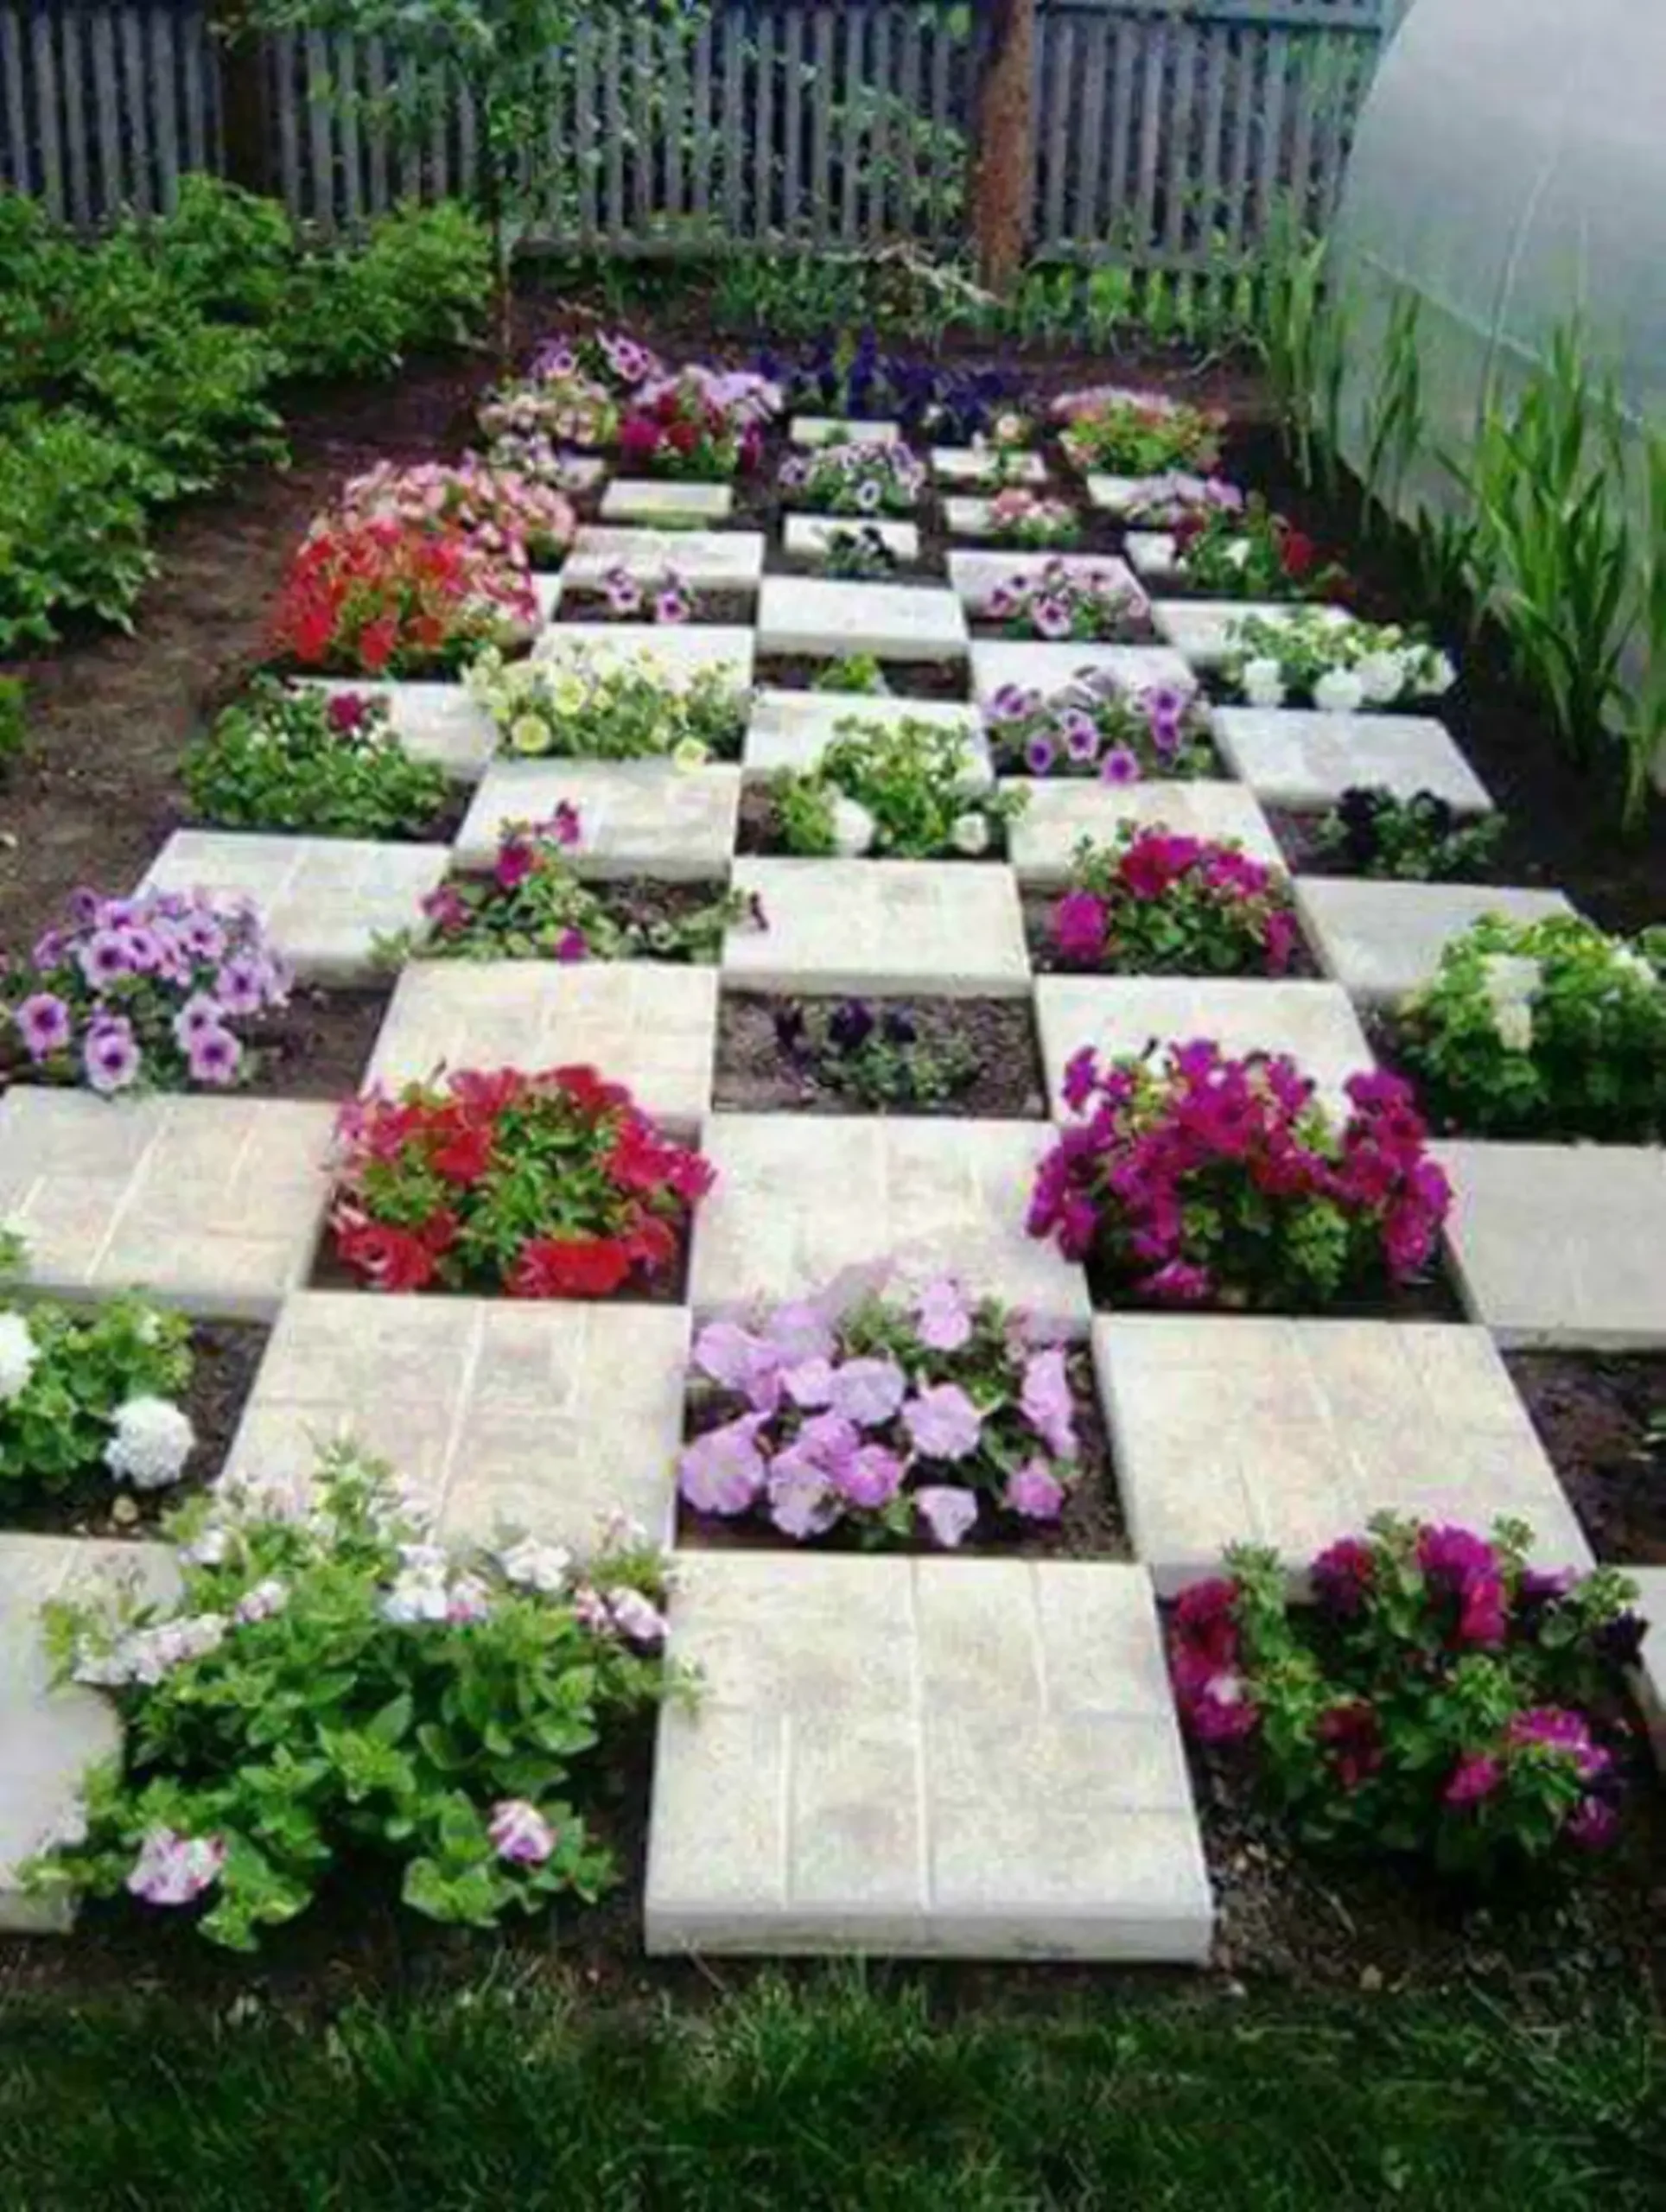 Checkered Board Garden With Steping Stones